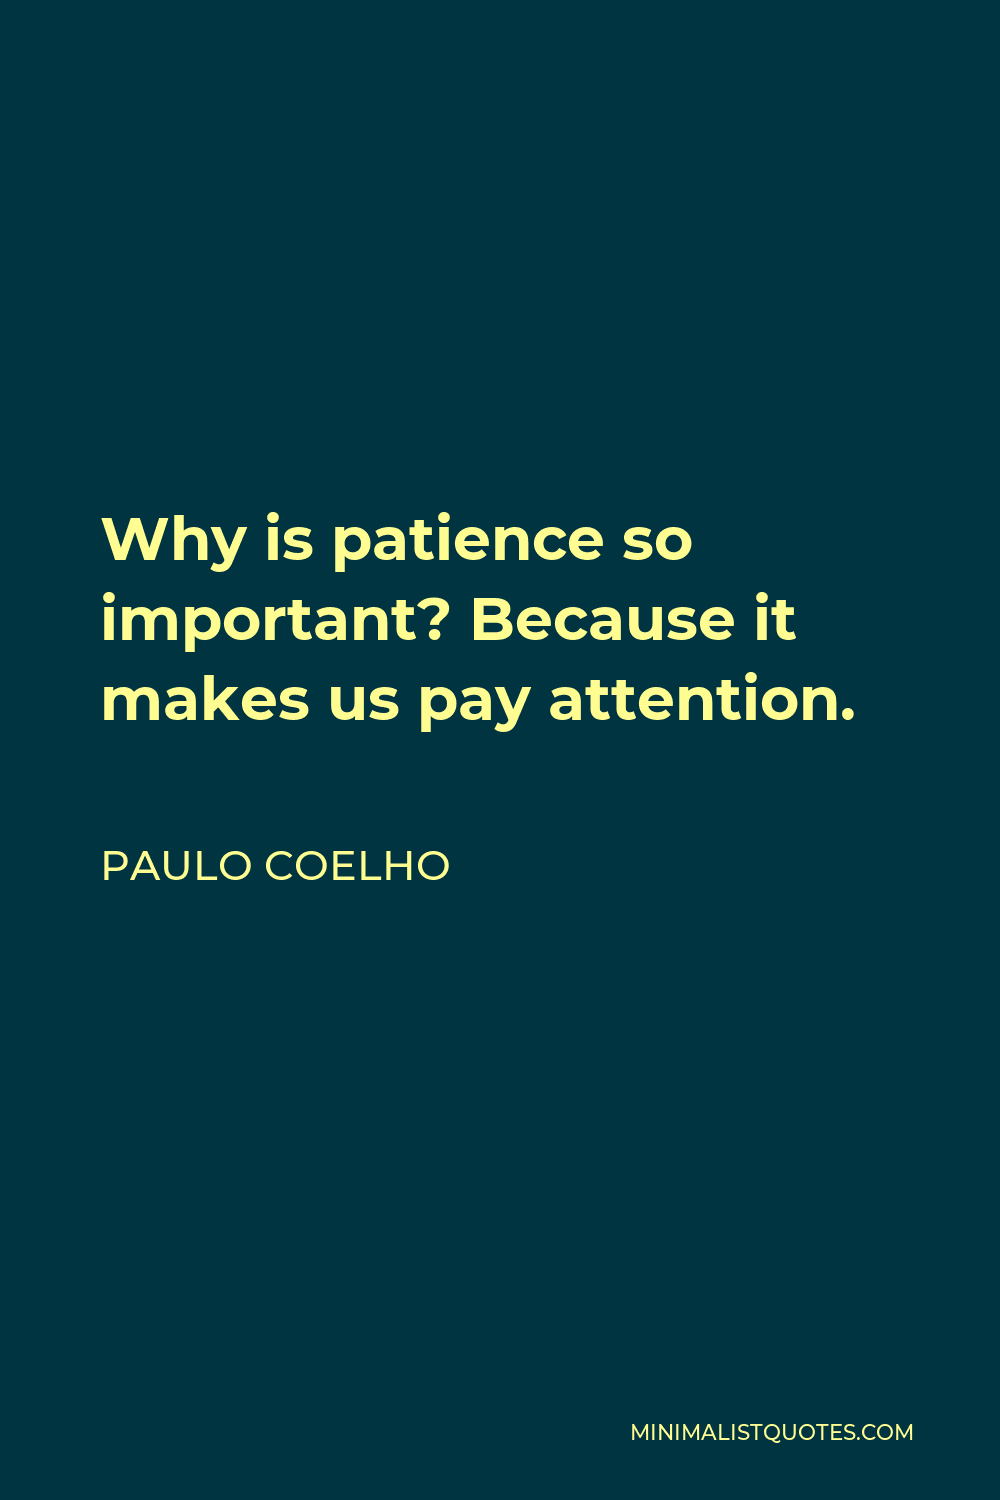 Paulo Coelho Quote - Why is patience so important? Because it makes us pay attention.